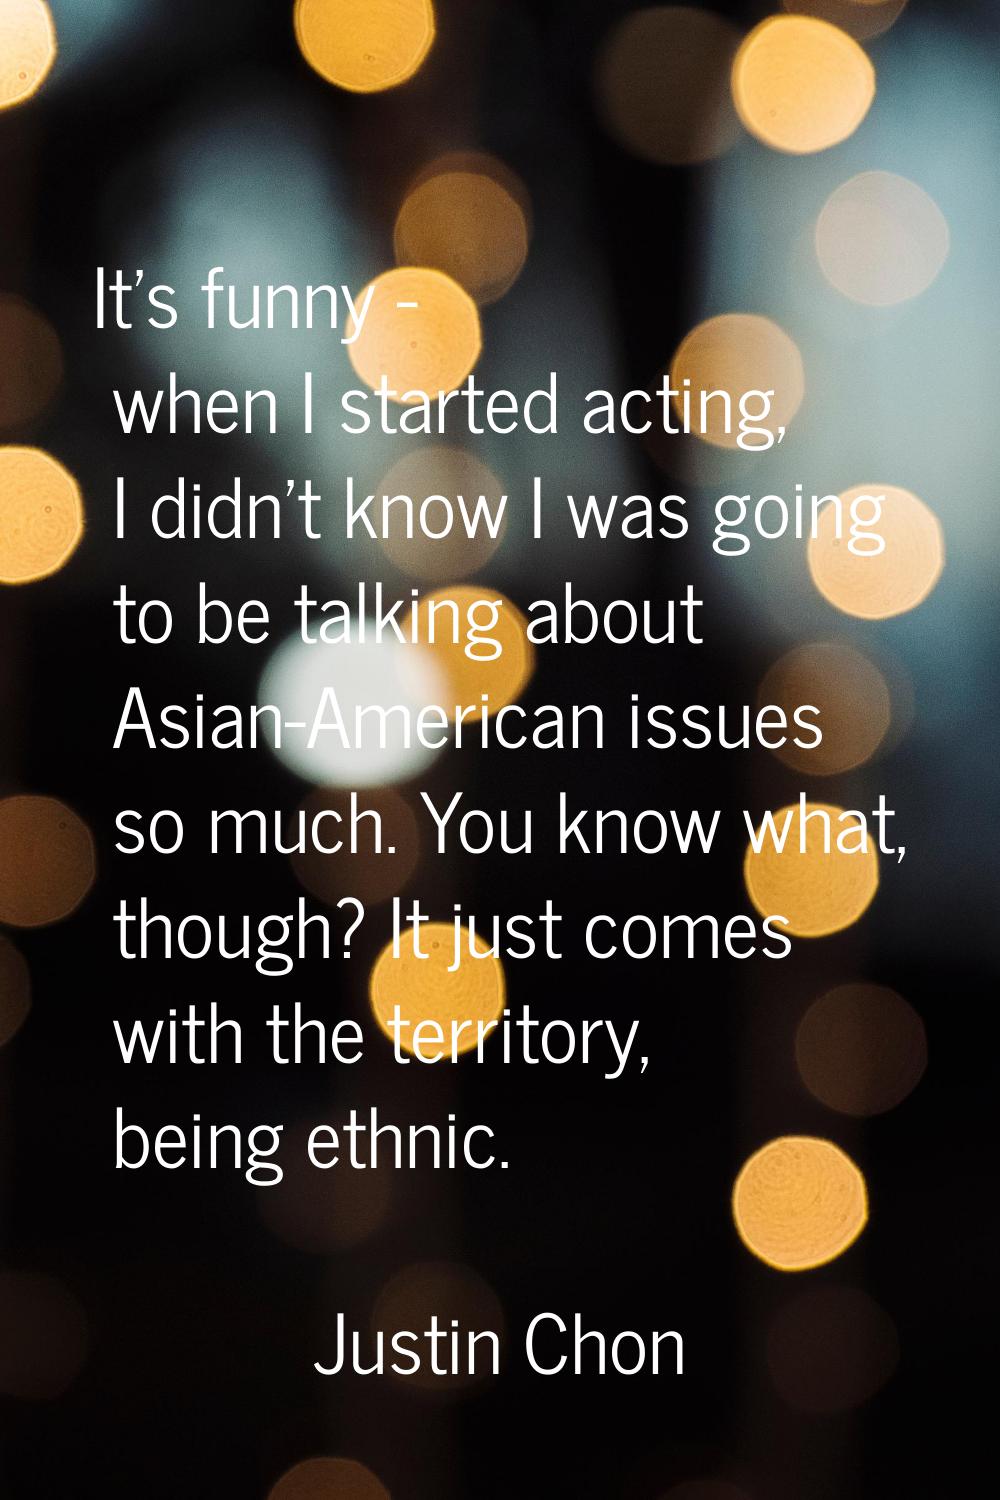 It's funny - when I started acting, I didn't know I was going to be talking about Asian-American is